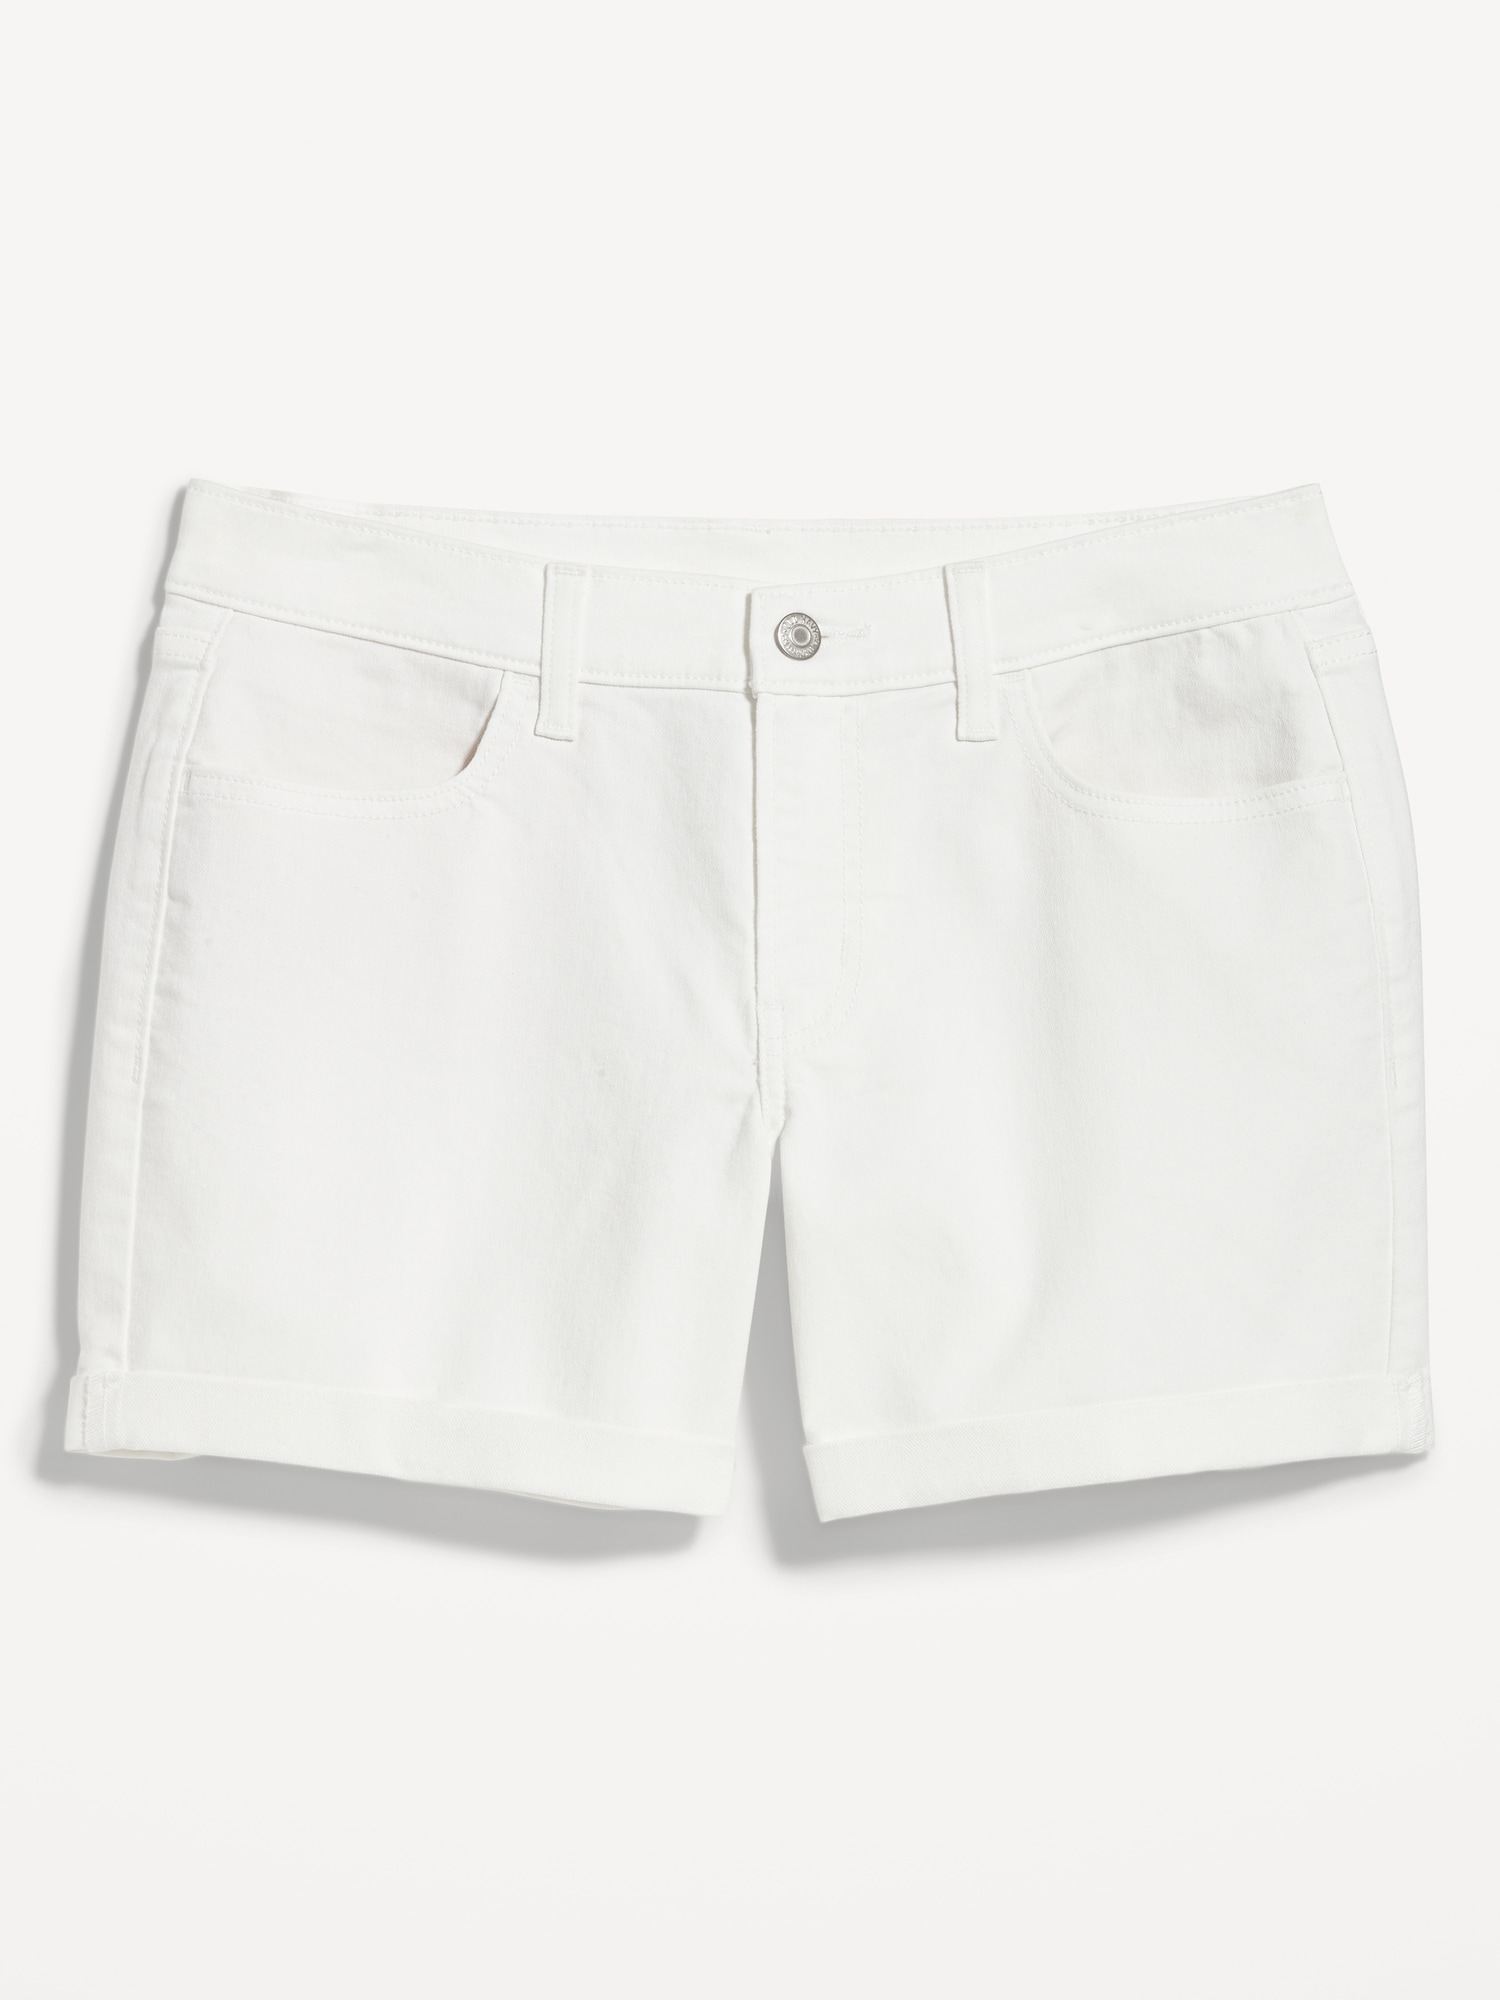 White Jean Shorts for Women -- 5-inch inseam Old Navy